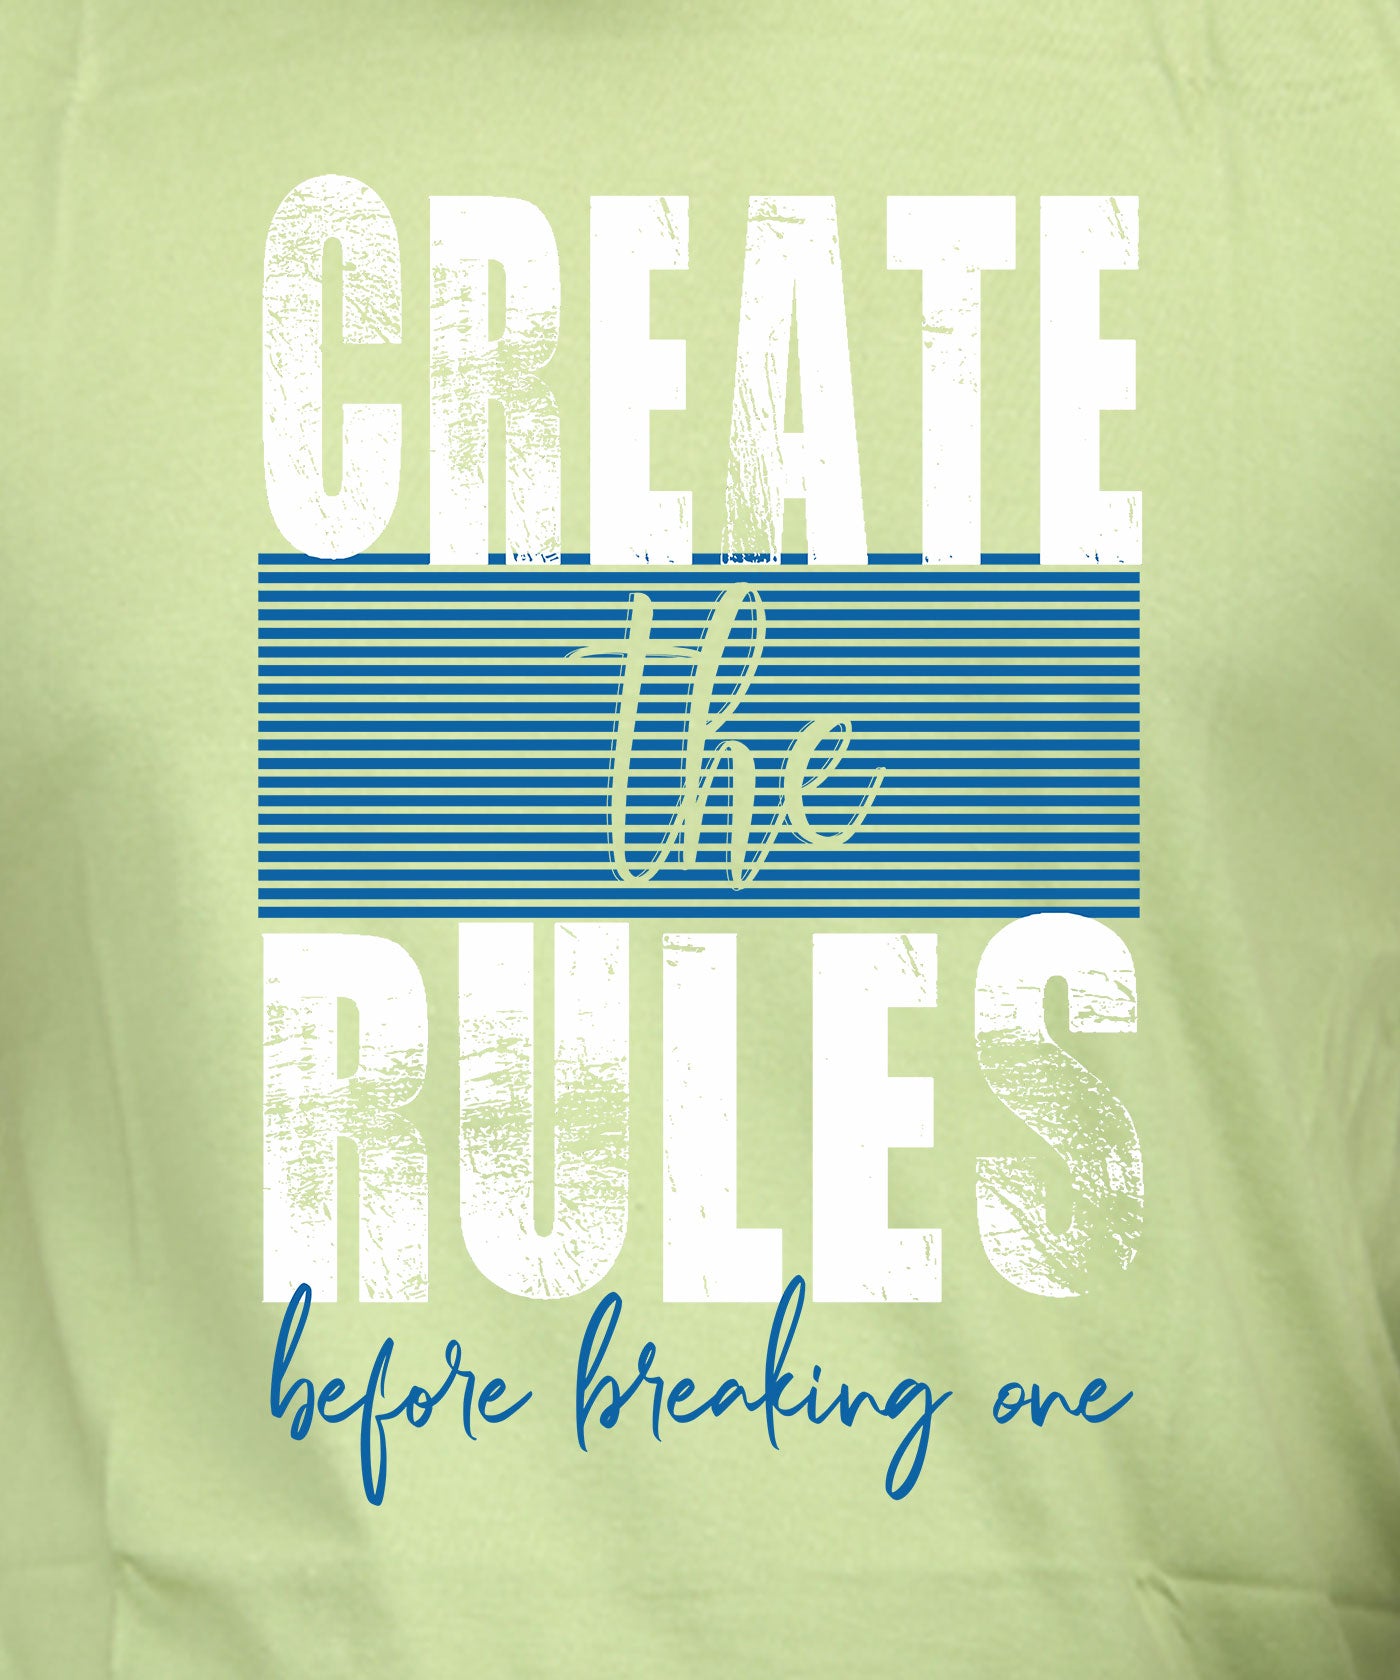 Create Rules - Premium Round Neck Cotton Tees for Men - Parrot Green